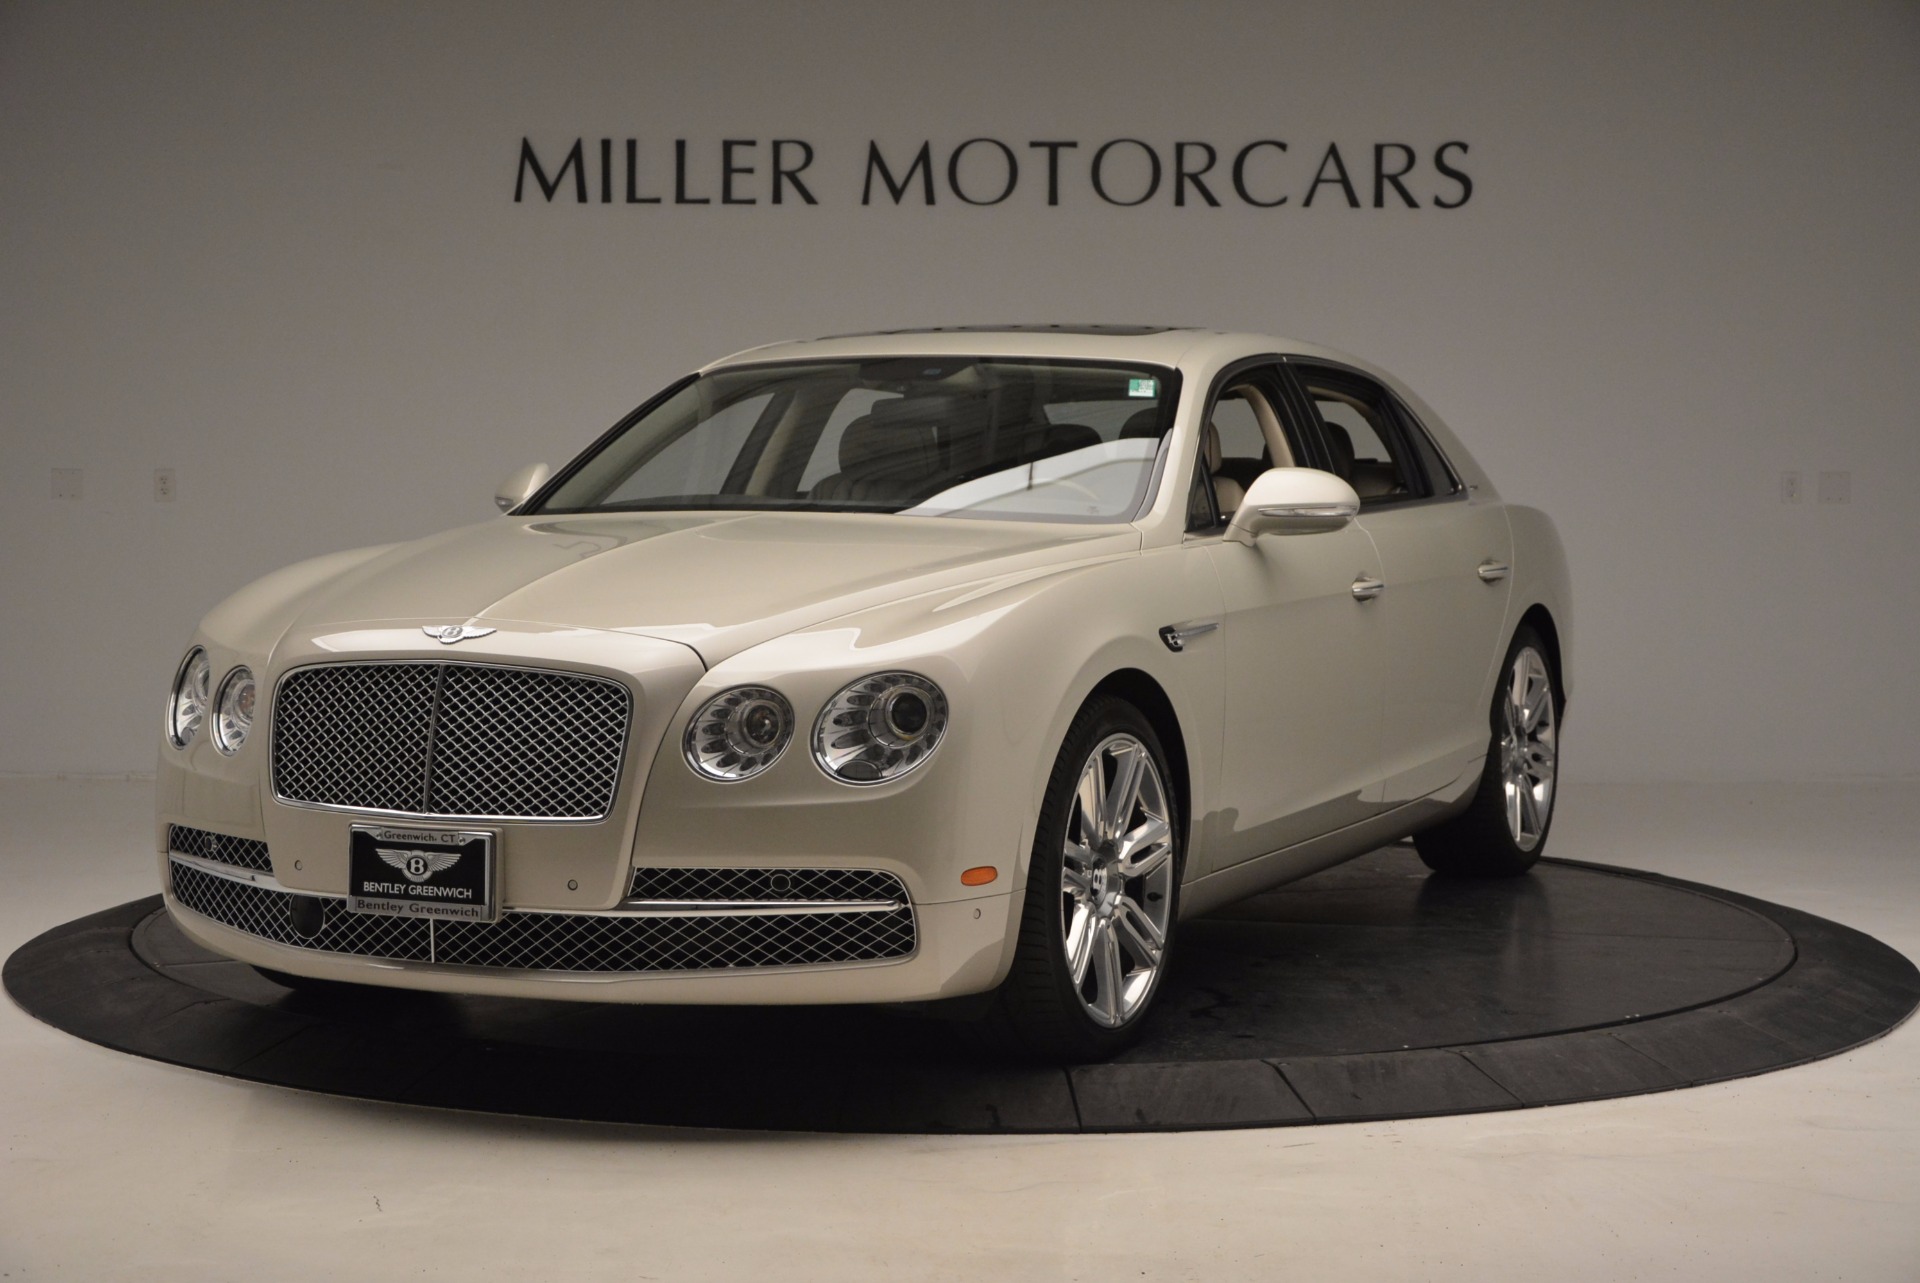 Used 2016 Bentley Flying Spur W12 for sale Sold at Rolls-Royce Motor Cars Greenwich in Greenwich CT 06830 1